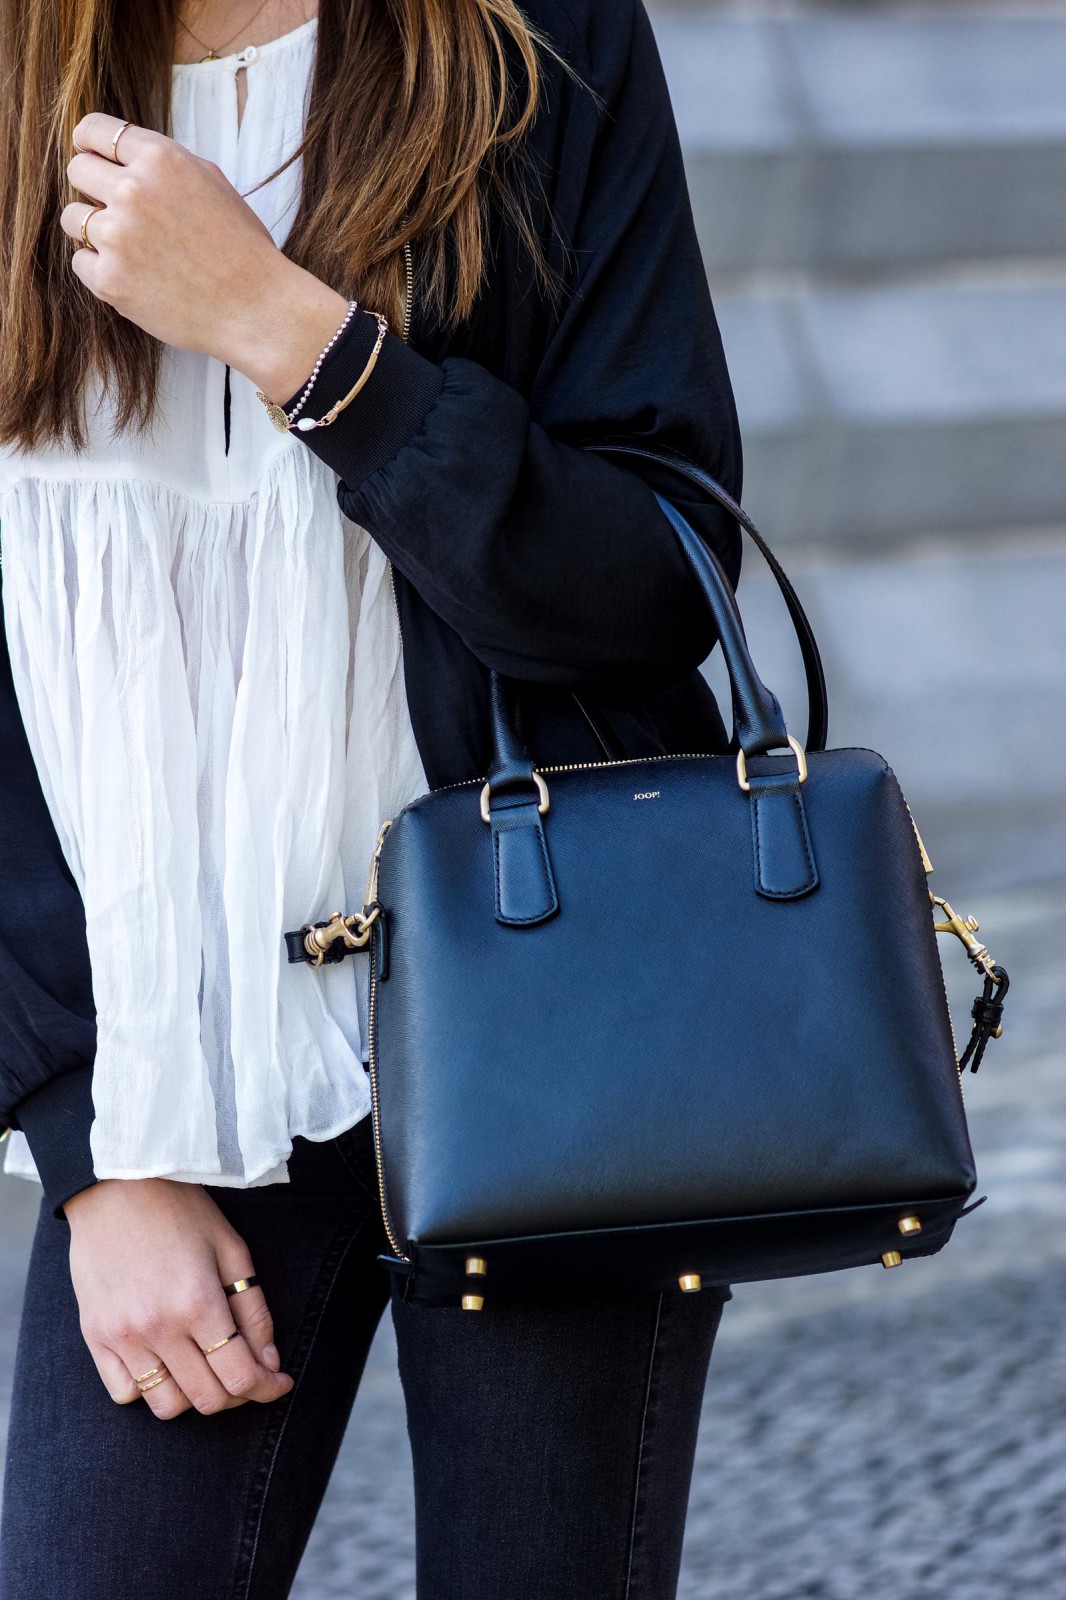 How to wear a black bag